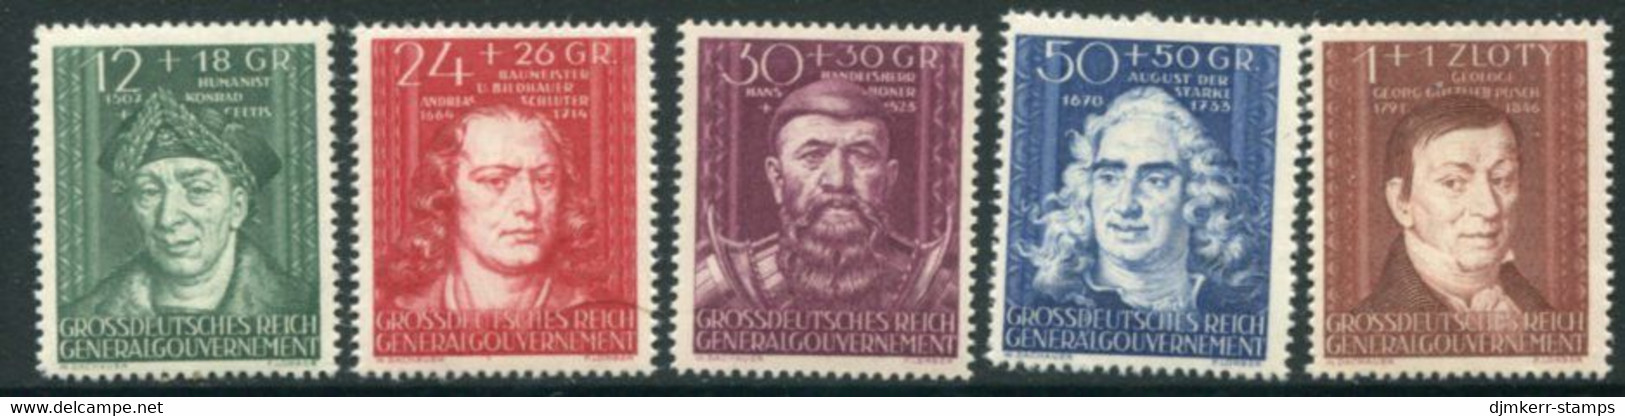 GENERAL GOVERNMENT 1944 Cultural Personalities  MNH / **   Michel 120-24 - General Government